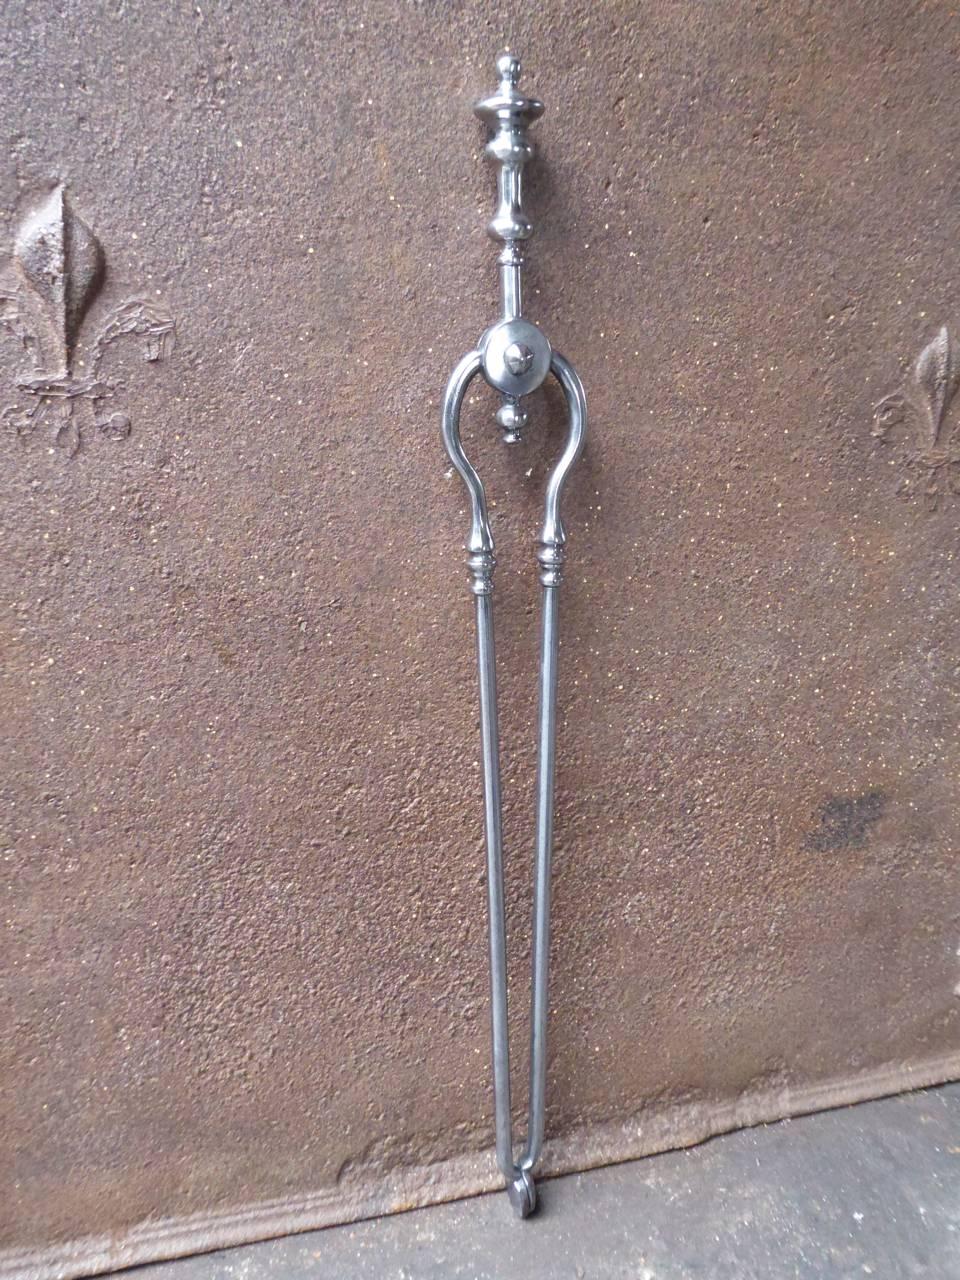 19th century English Victorian fireplace tongs made of polished steel.

We have a unique and specialized collection of antique and used fireplace accessories consisting of more than 1000 listings at 1stdibs. Amongst others we always have 300+